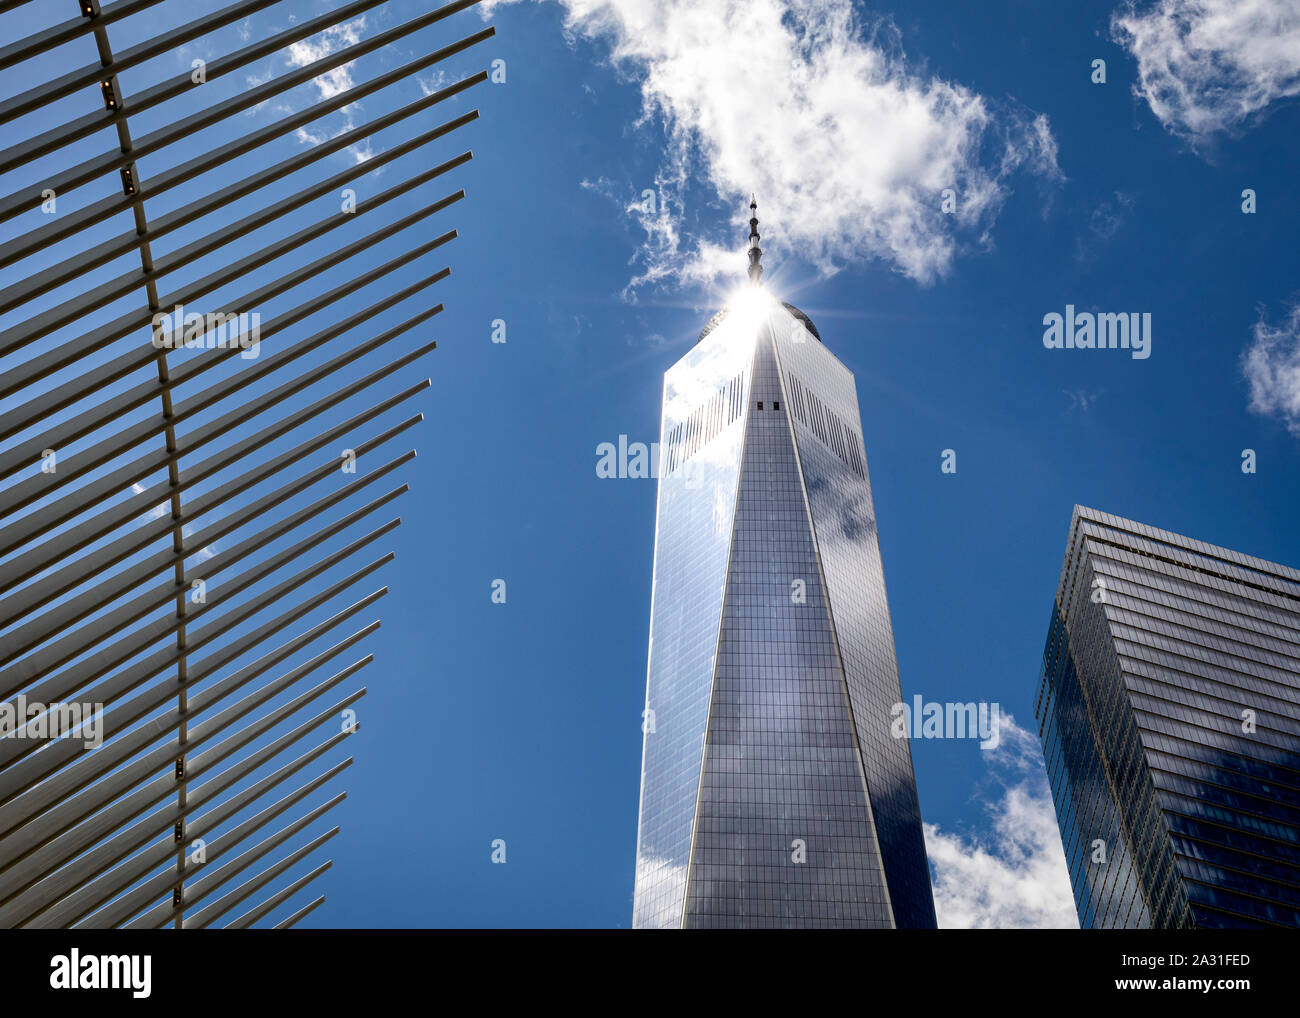 One World Trade Center as seen from the Oculus, Manhattan, New York City, USA. Stock Photo